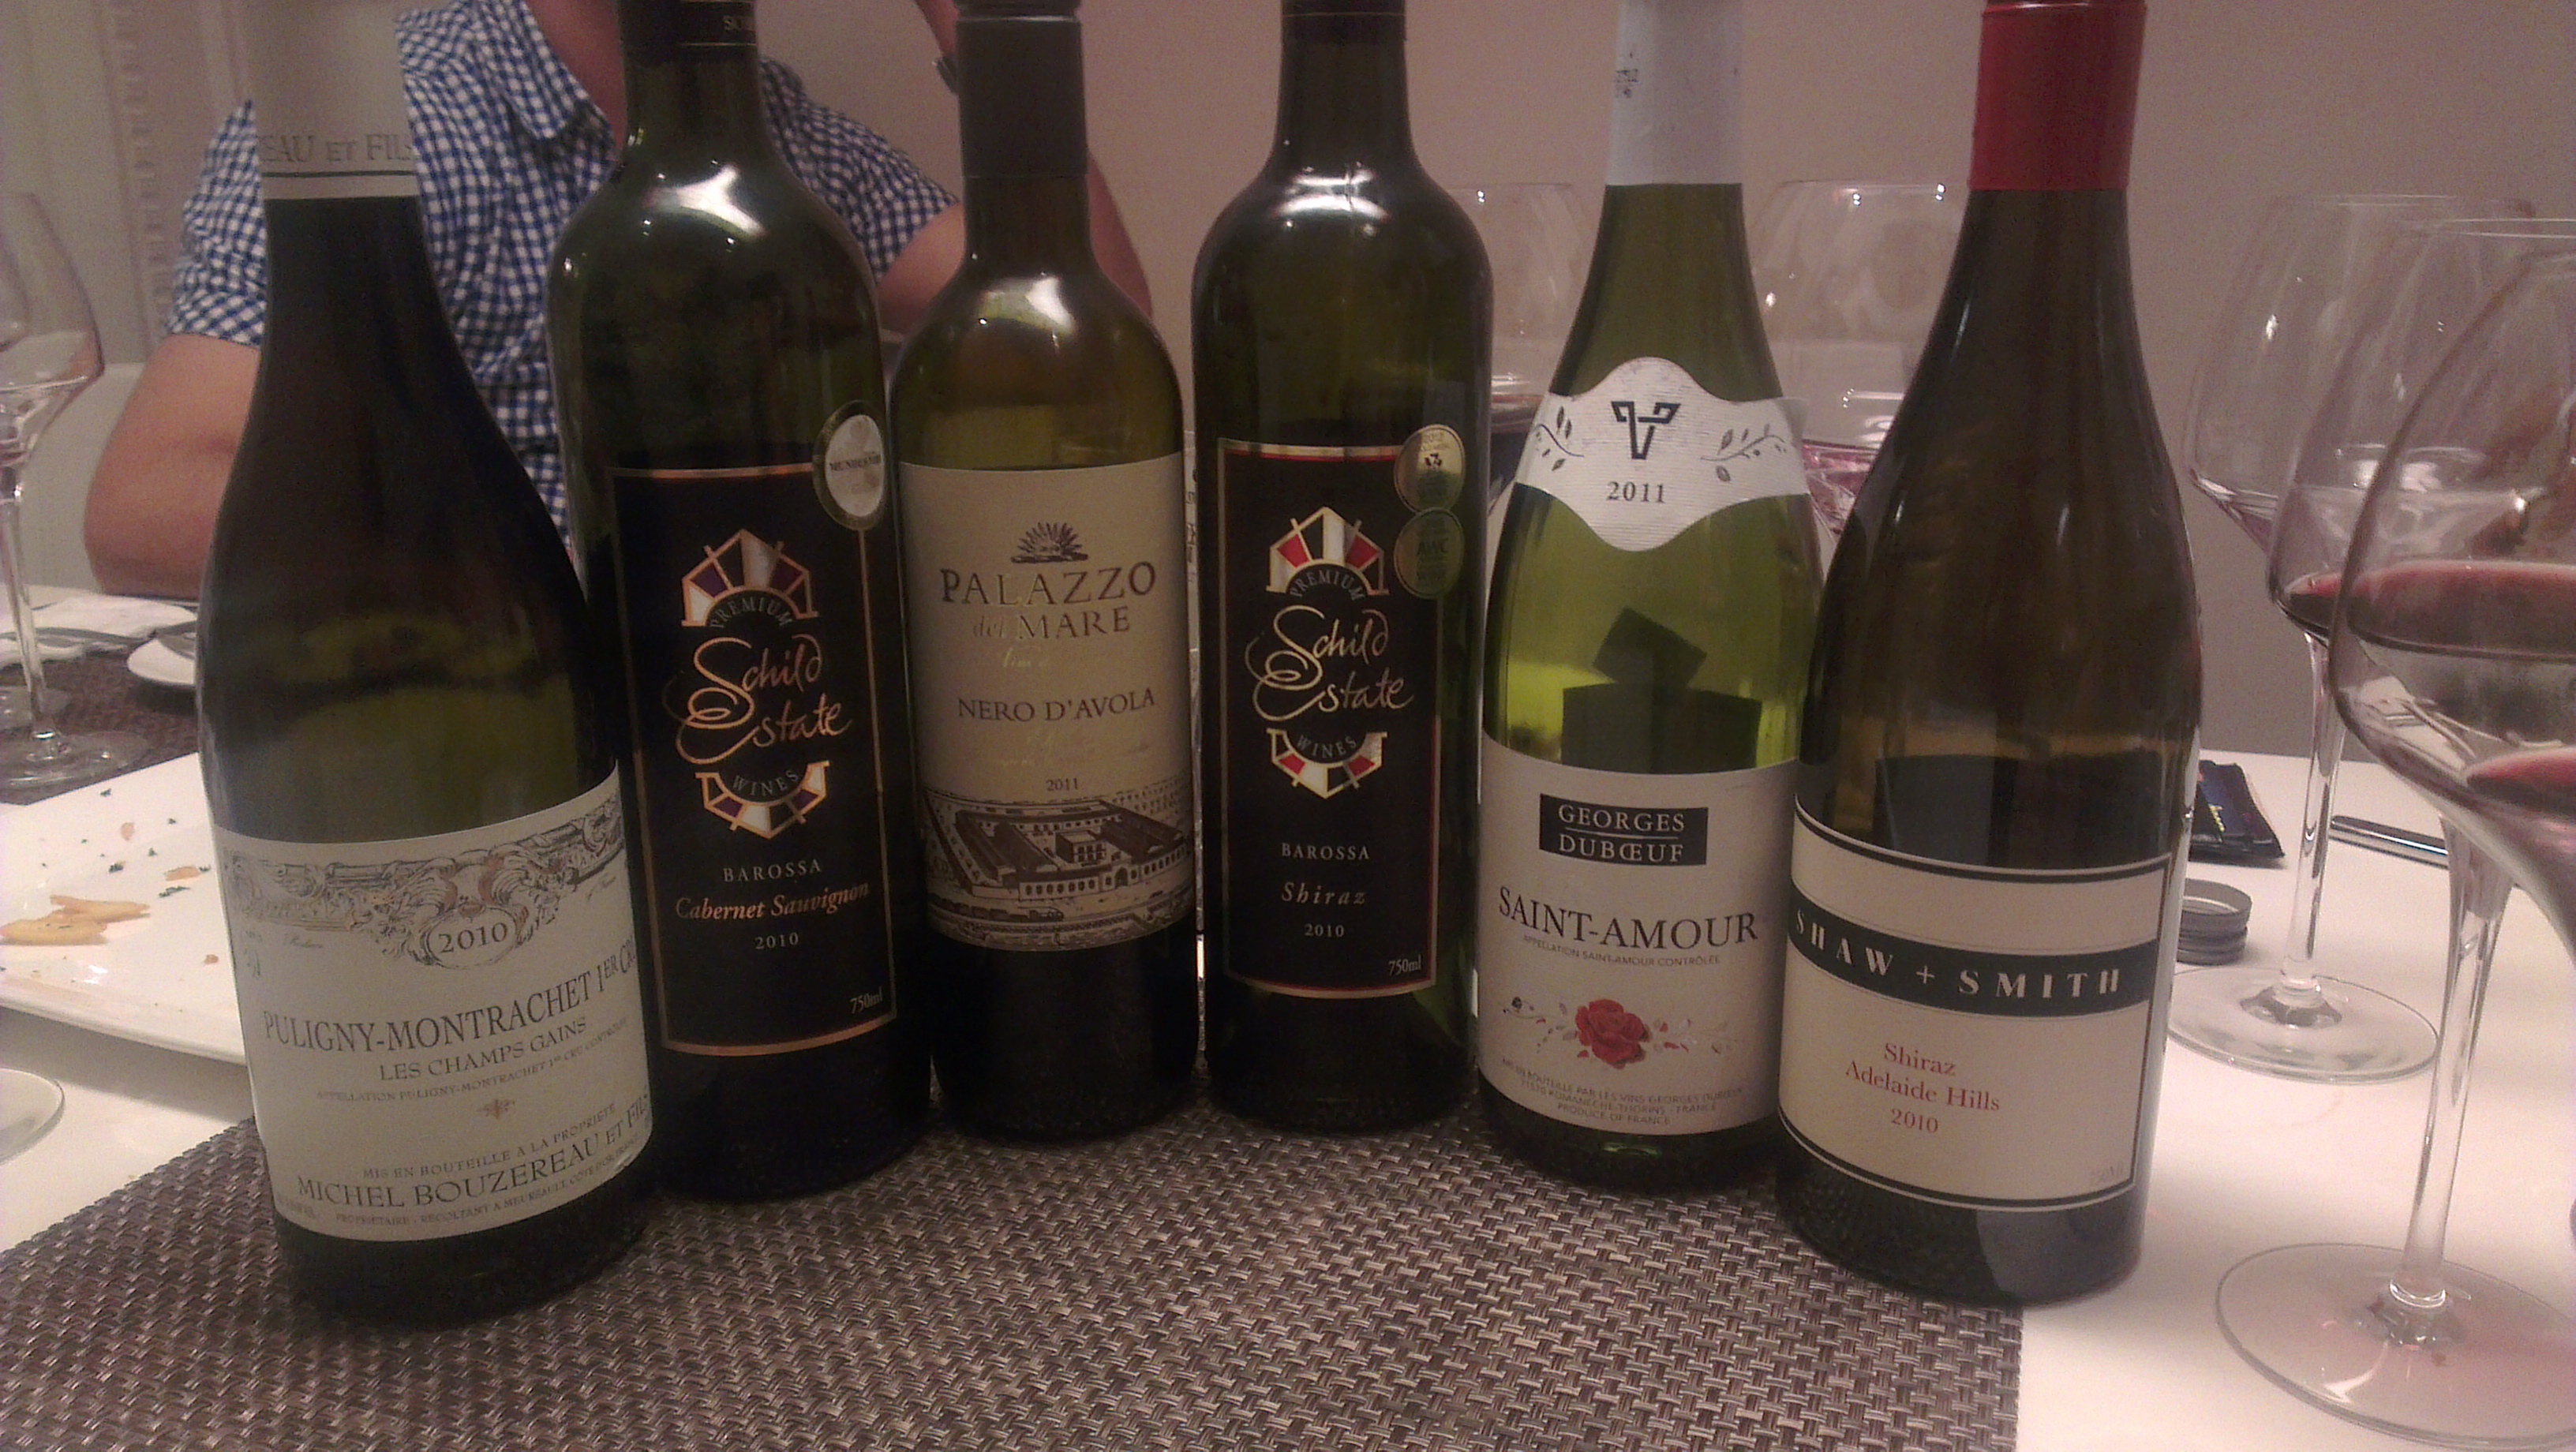 Wines tasted in a session with friends